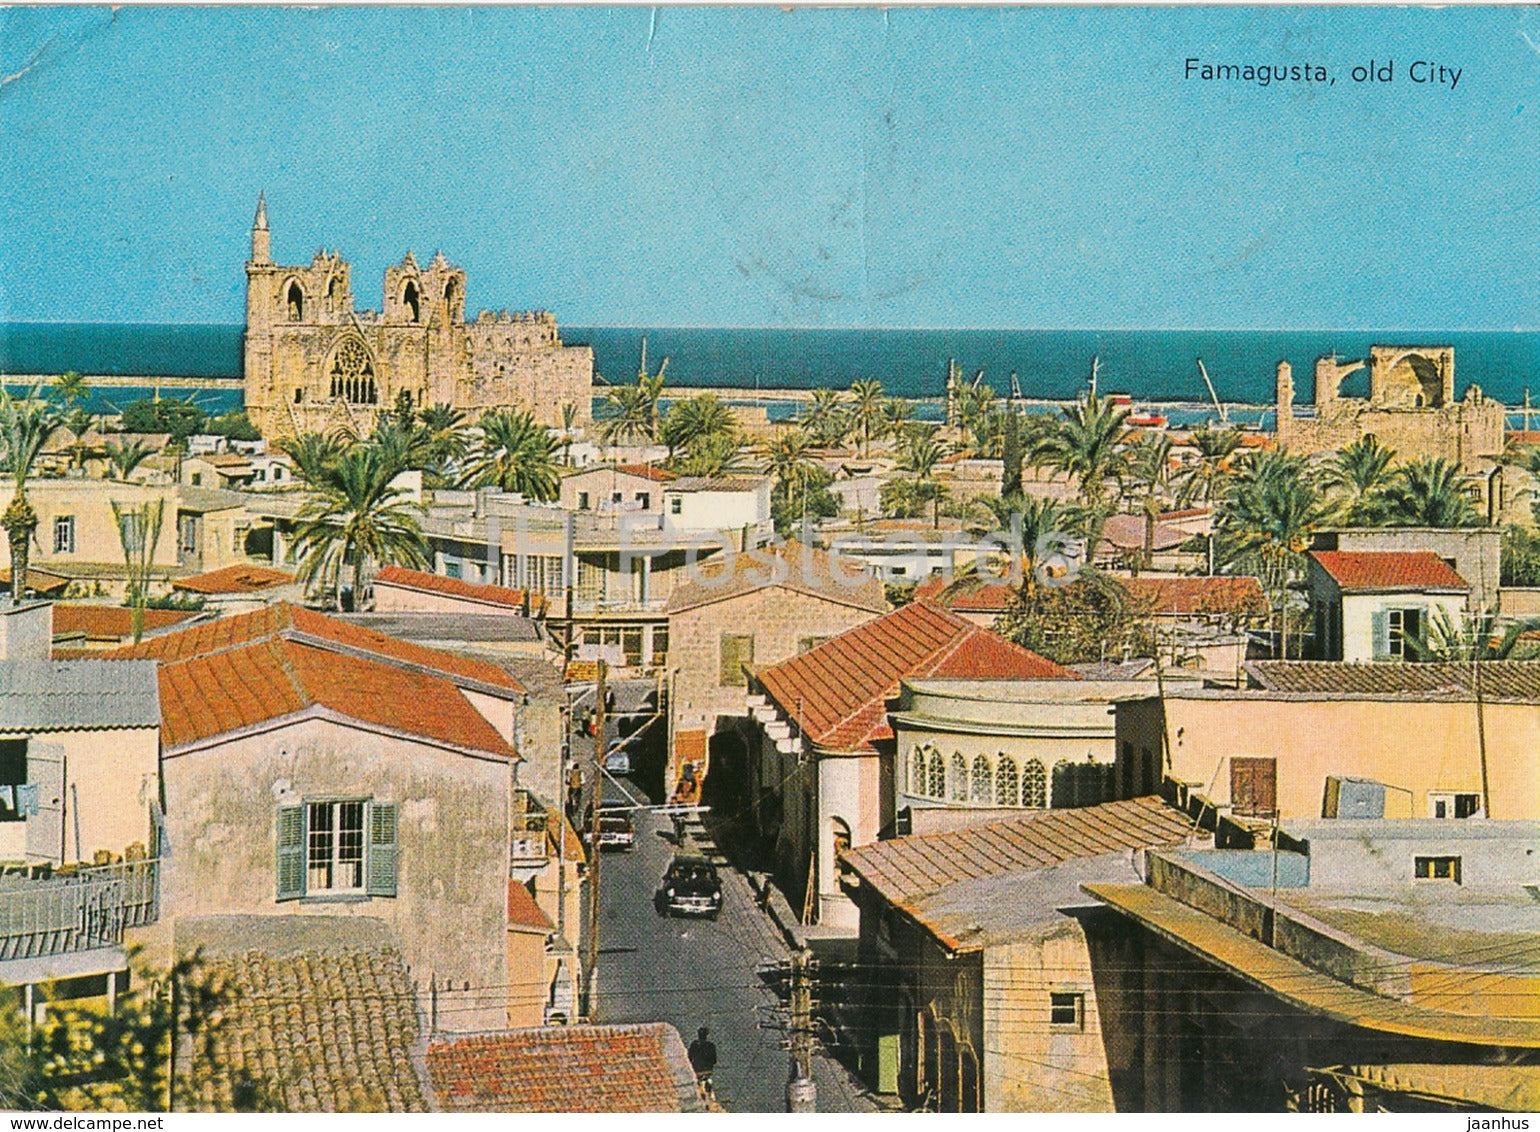 Famagusta - old city - 92 - 1972 - Cyprus - used - JH Postcards